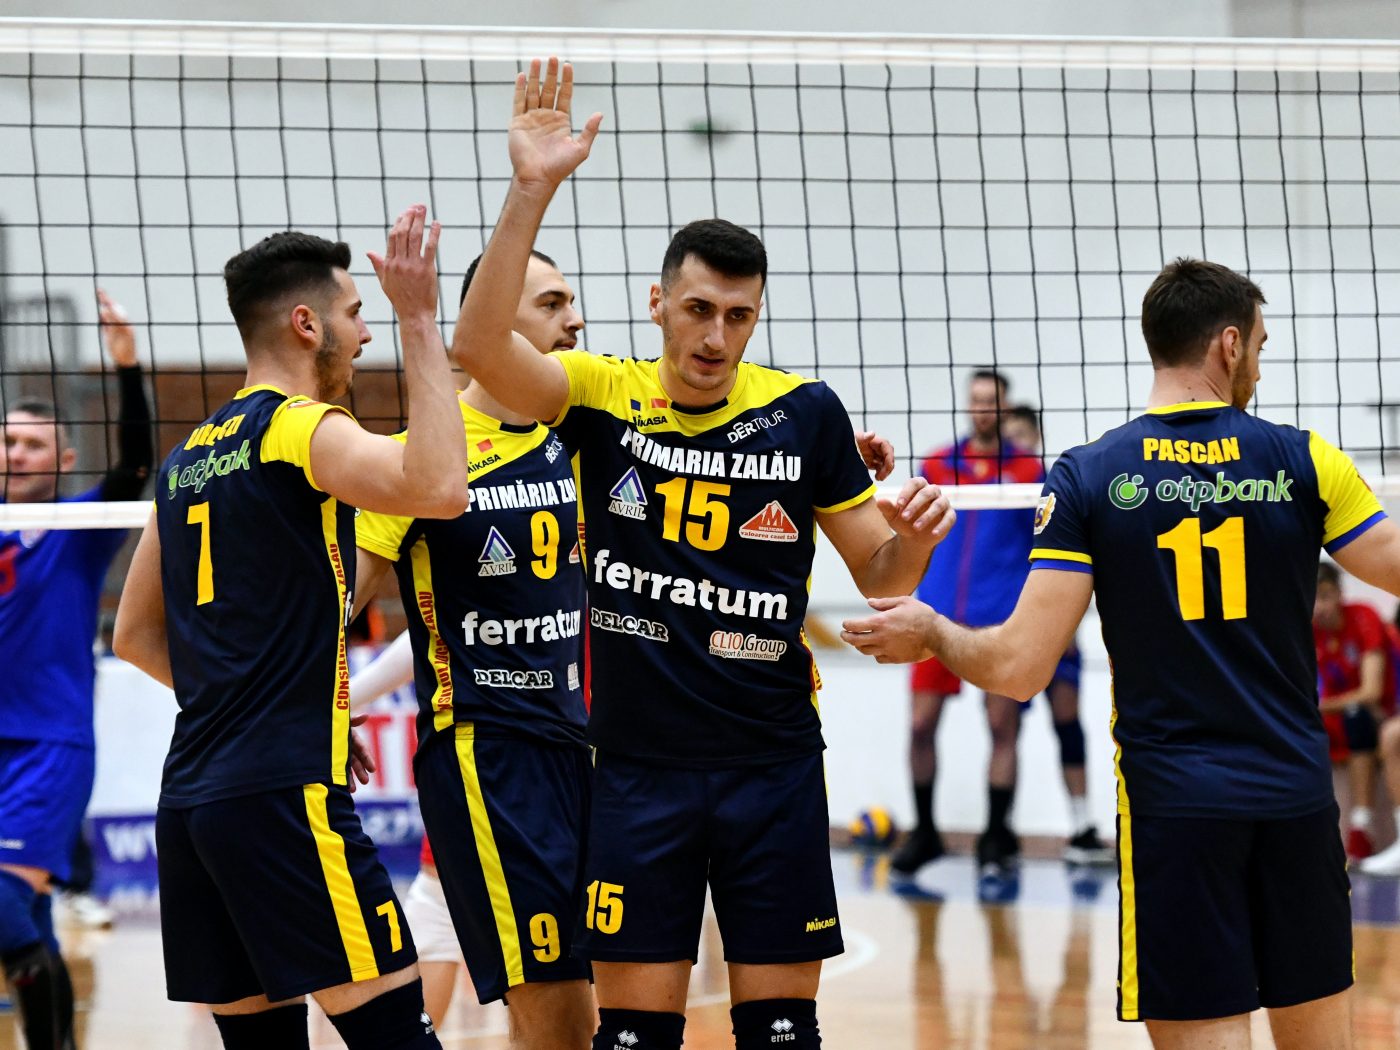 Today, the quarterfinals of the Romanian Men’s Volleyball Cup are played in Cluj-Napoca.  Who broadcasts the final stages of the competition on television during the weekend